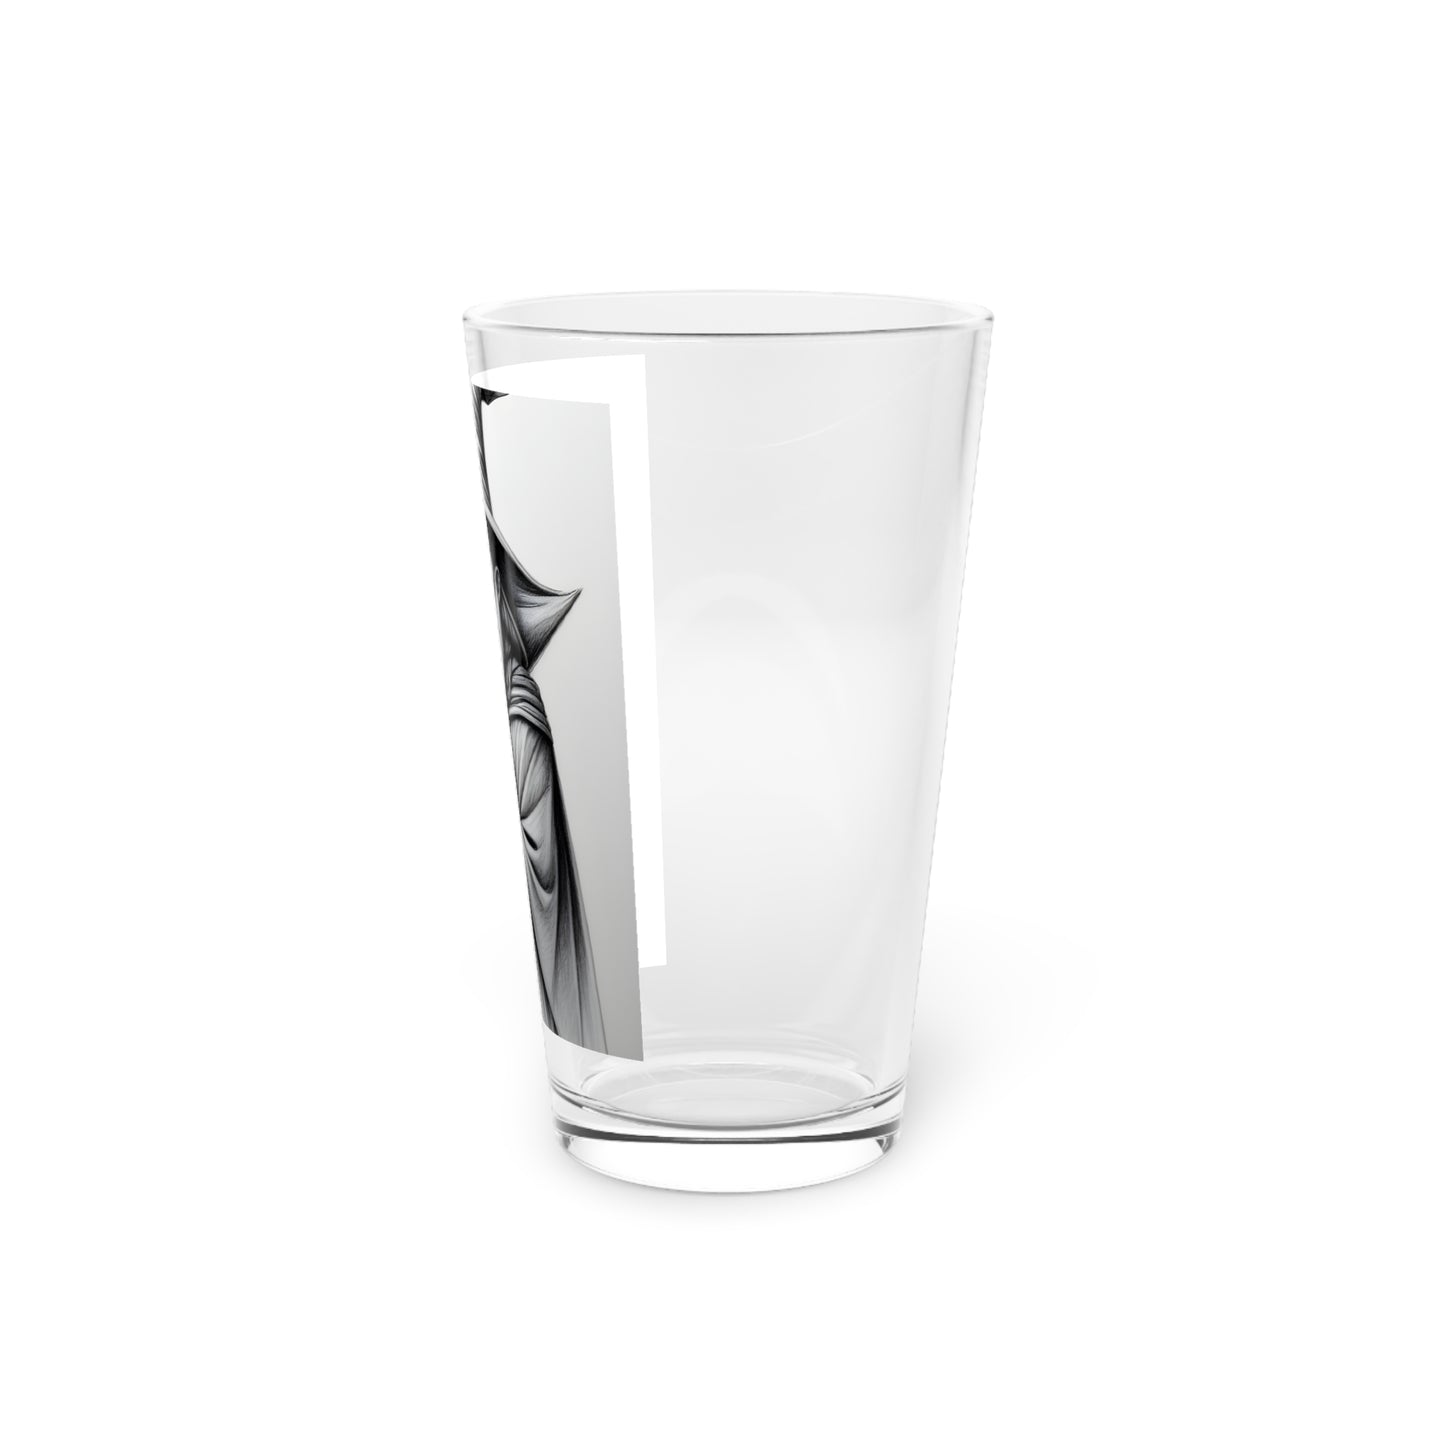 Gaming Wizard Pint Glass, 16oz Clear Glass, Makes for a Perfect Gift!